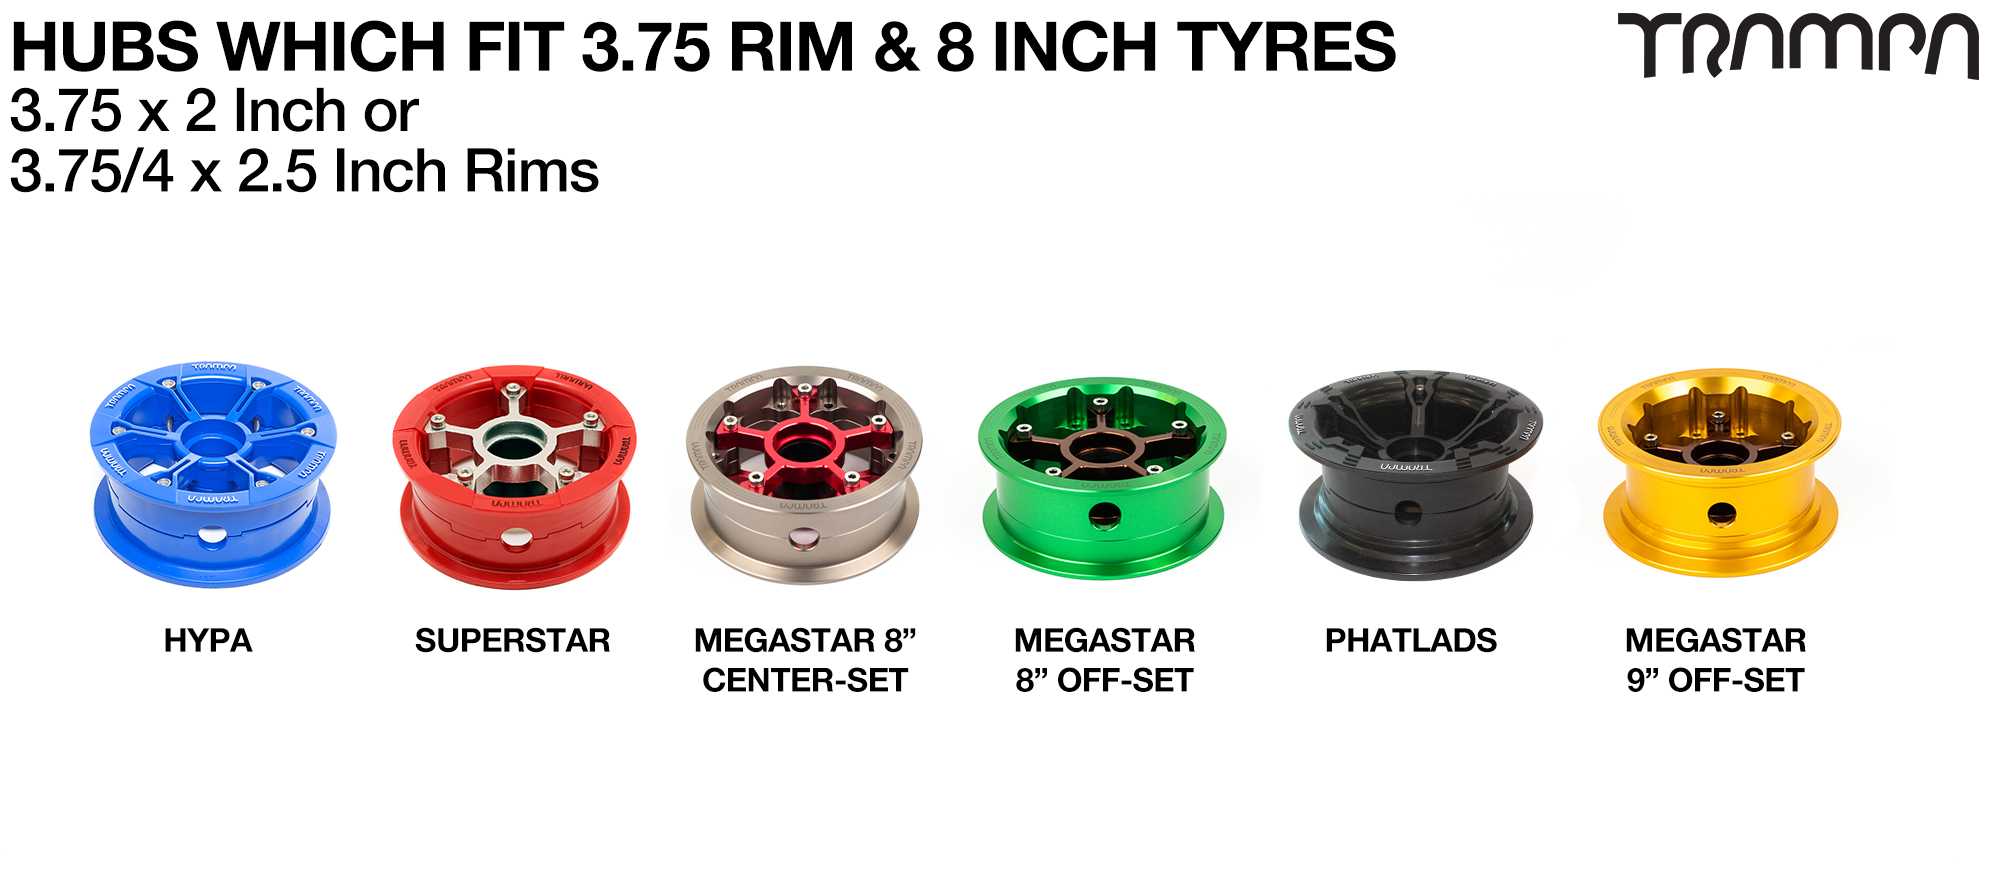 PRIMO ALPHA 8 inch Tyre measure 3.75x 2x 8 Inch or 200x50mm with 3.75 inch Rim fits all 3.75 inch Hubs